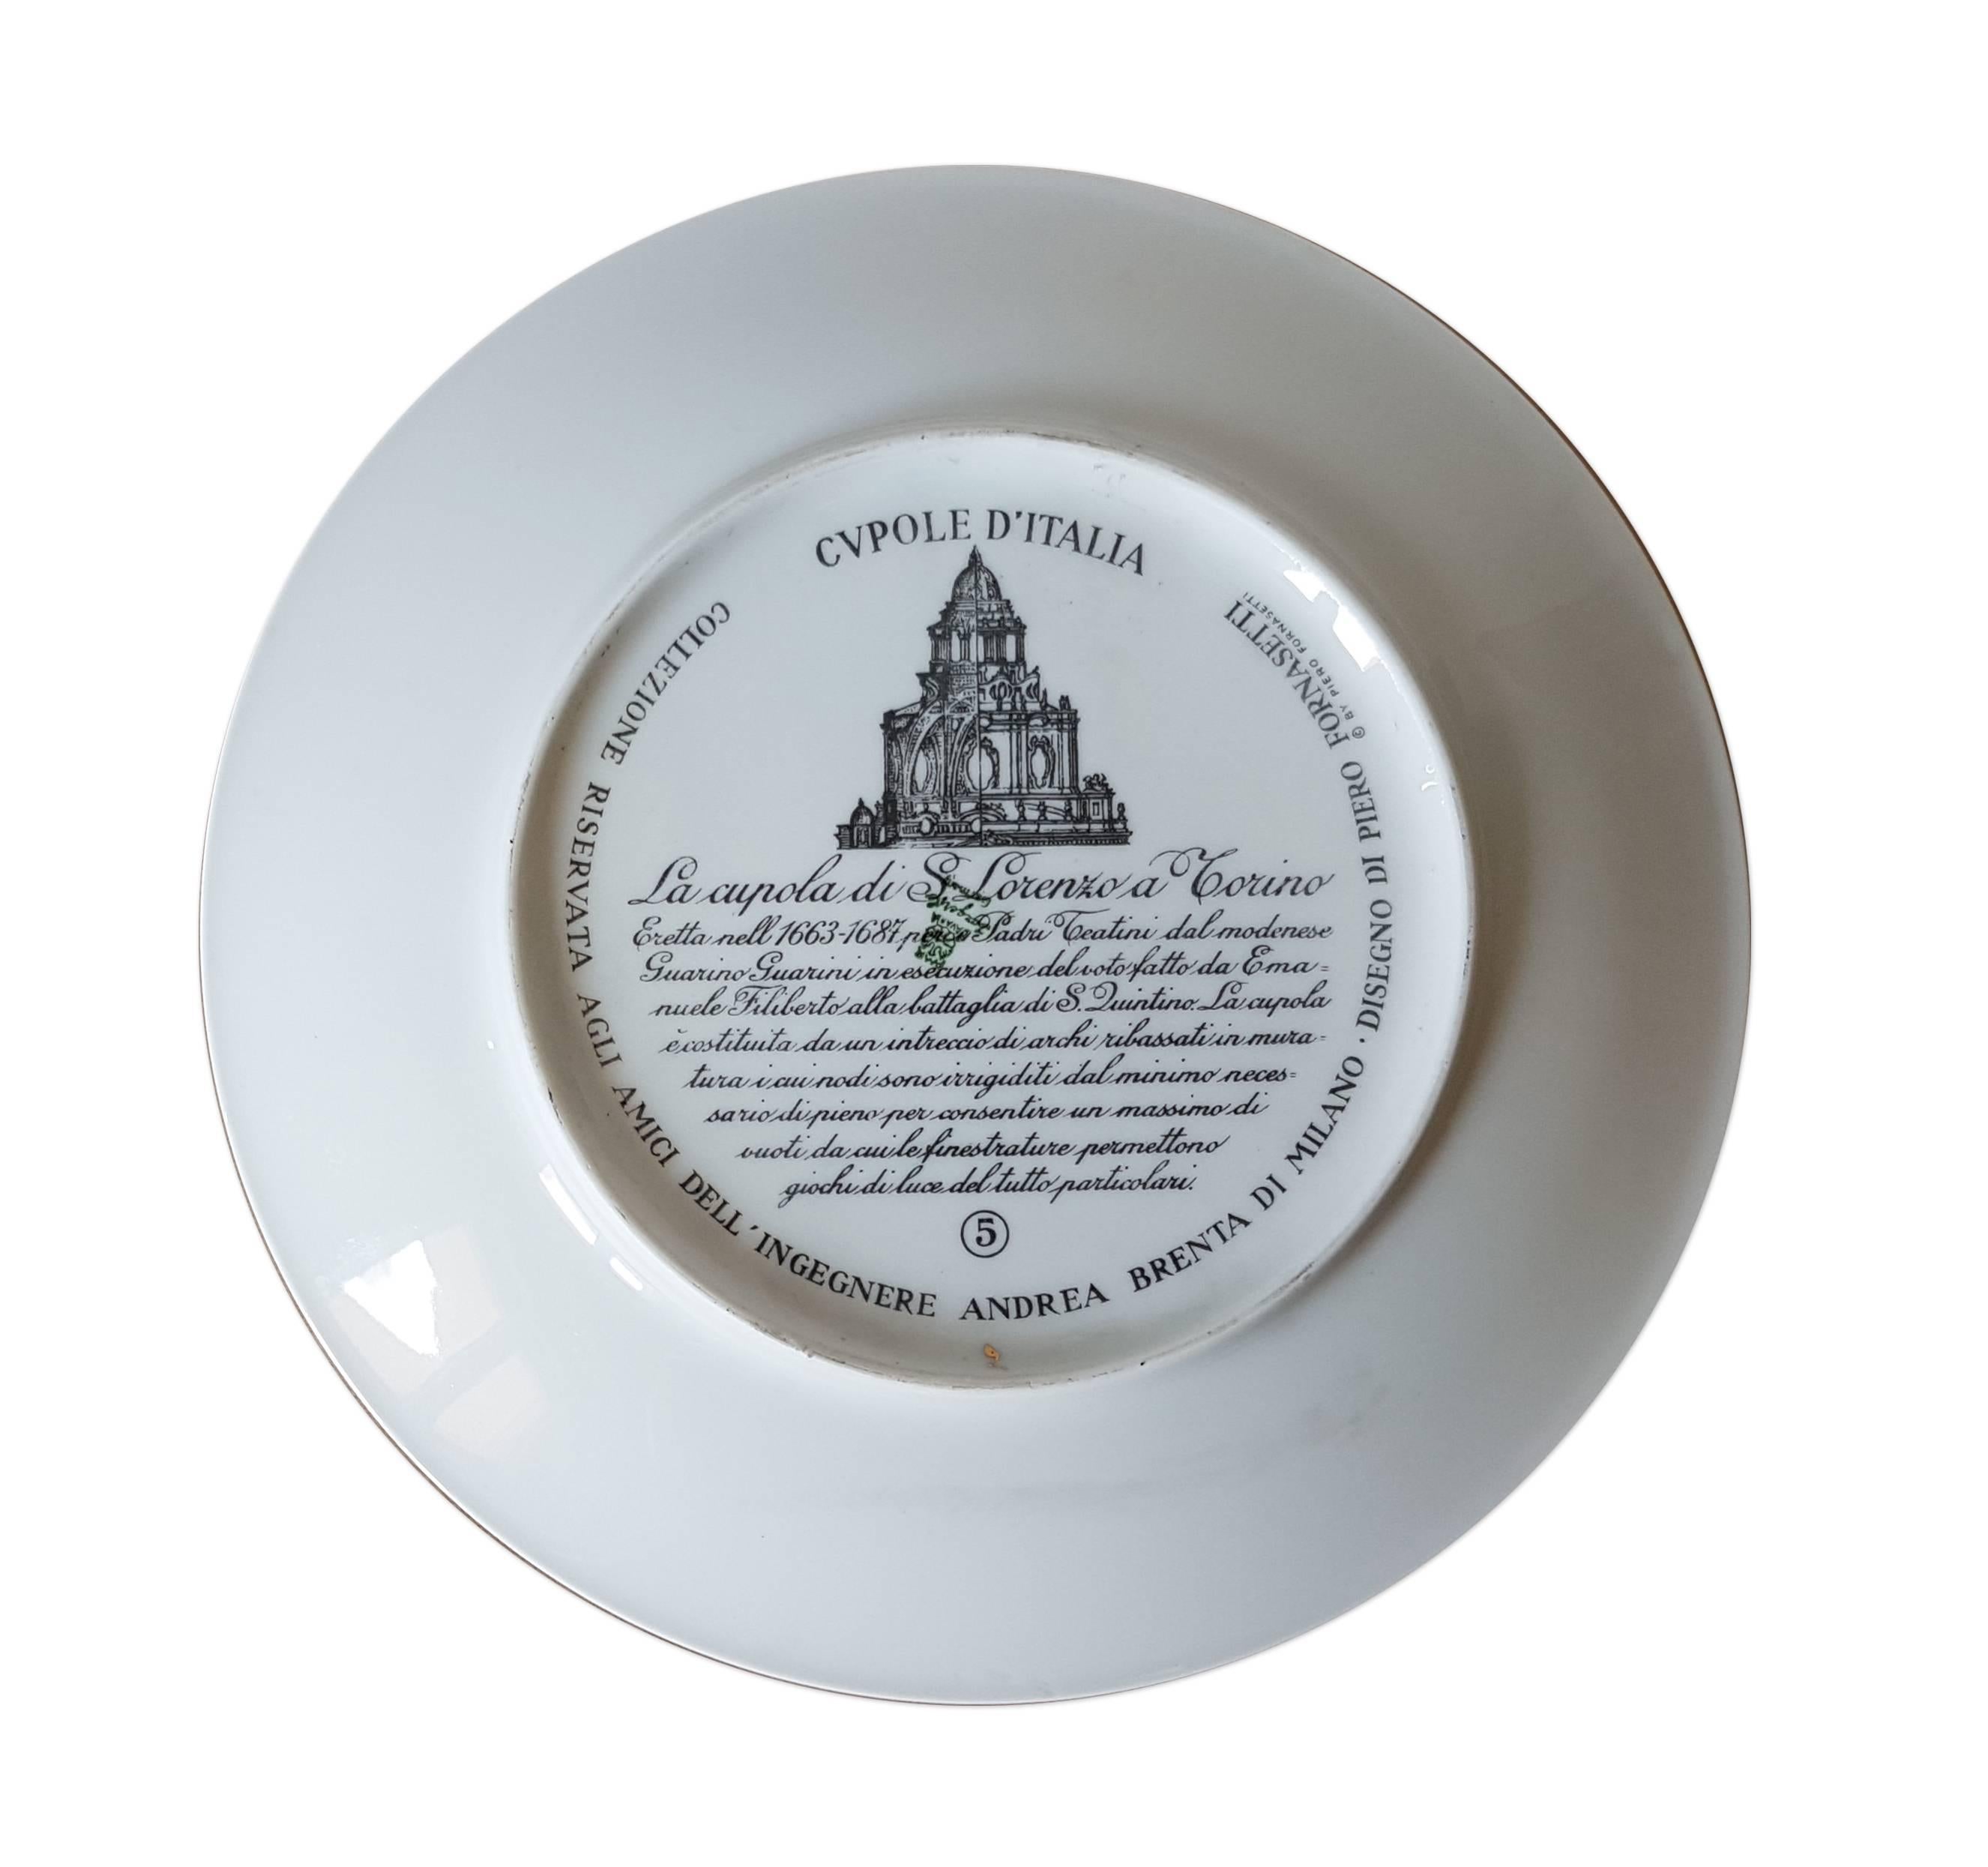 Decorated porcelain
Plate number 5 from the series Cupole d’Italia: Cupola di San Lorenzo a Torino.
Each plate with a different dome of an Italian church seen from the inside named and numbered on the reverse. These plates were designed and